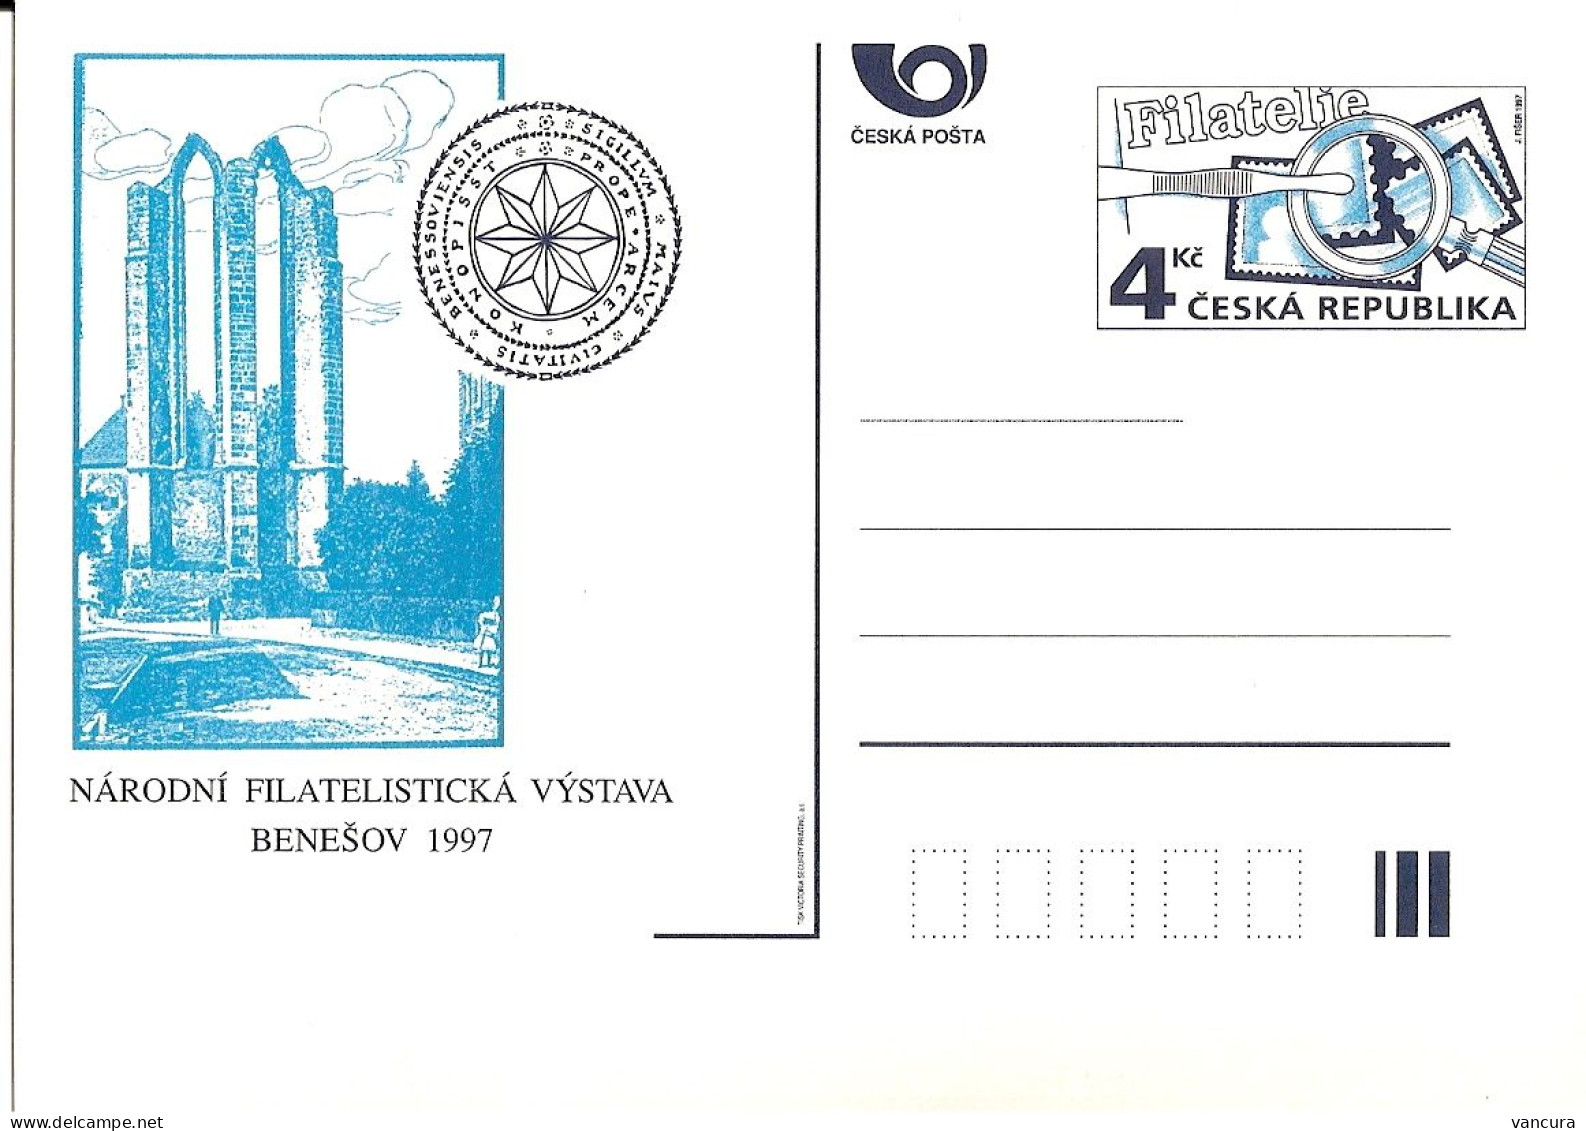 CDV 24 Czech Republic Ruins Of The Benesov Monastery - National Stamp Exhibition 1997 - Postcards